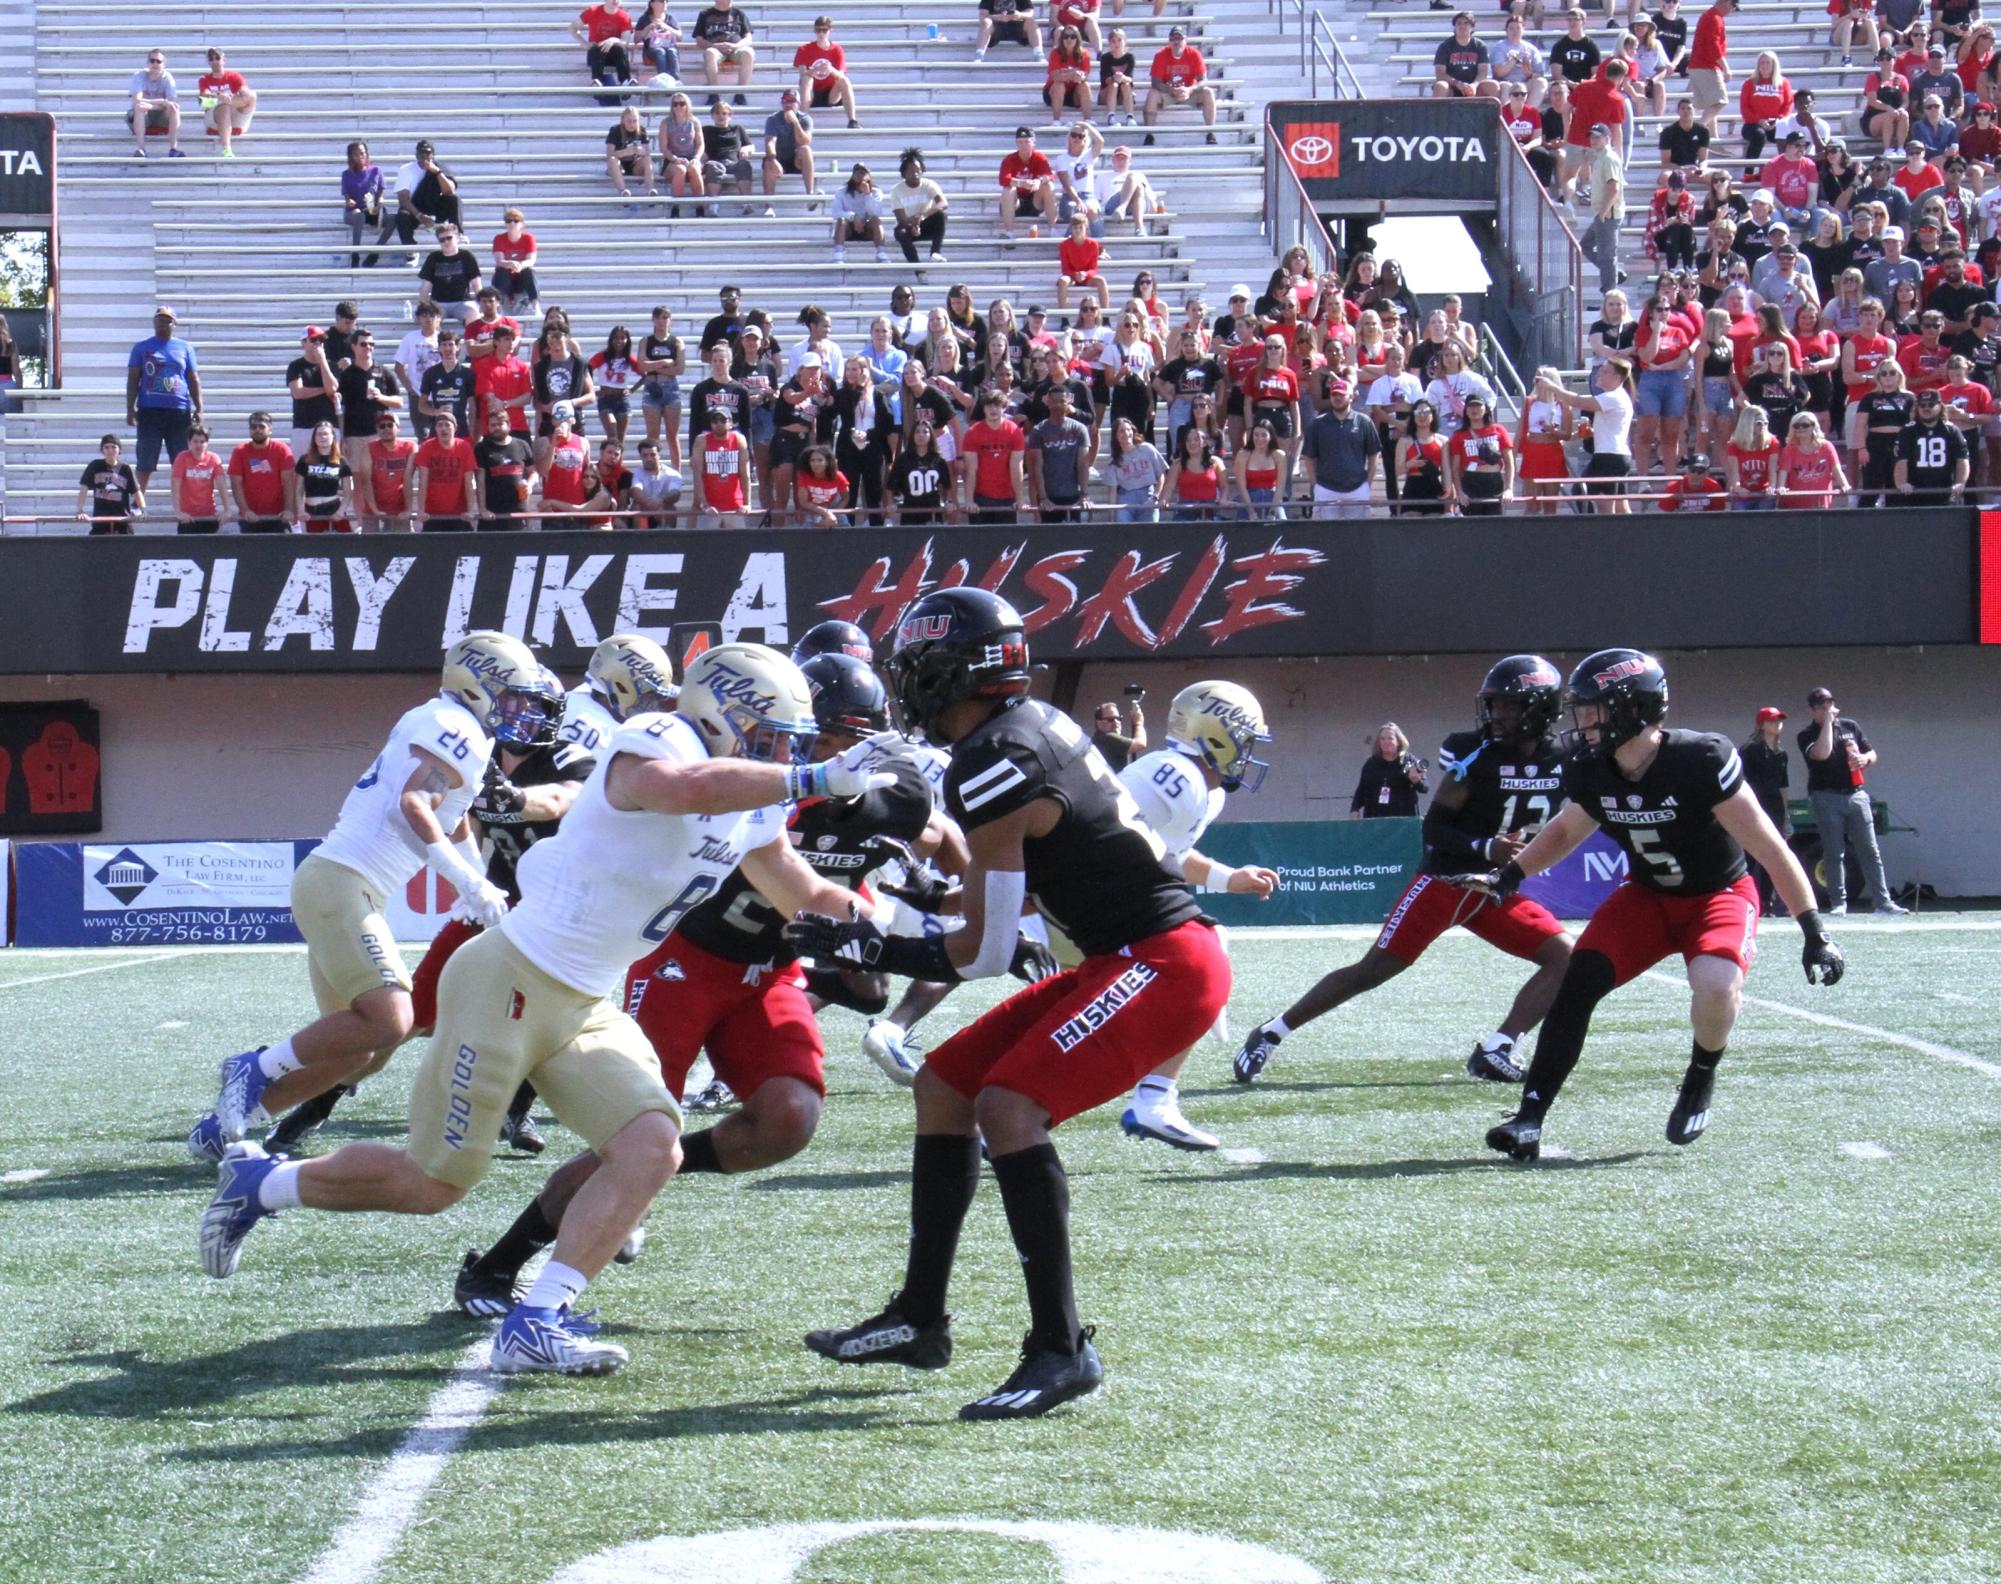 University of Tulsa special teams unit pushes against NIU punt cover during Saturday games. Tulsa beat the Huskies 22-14. (Nyla Owens | Northern Star)